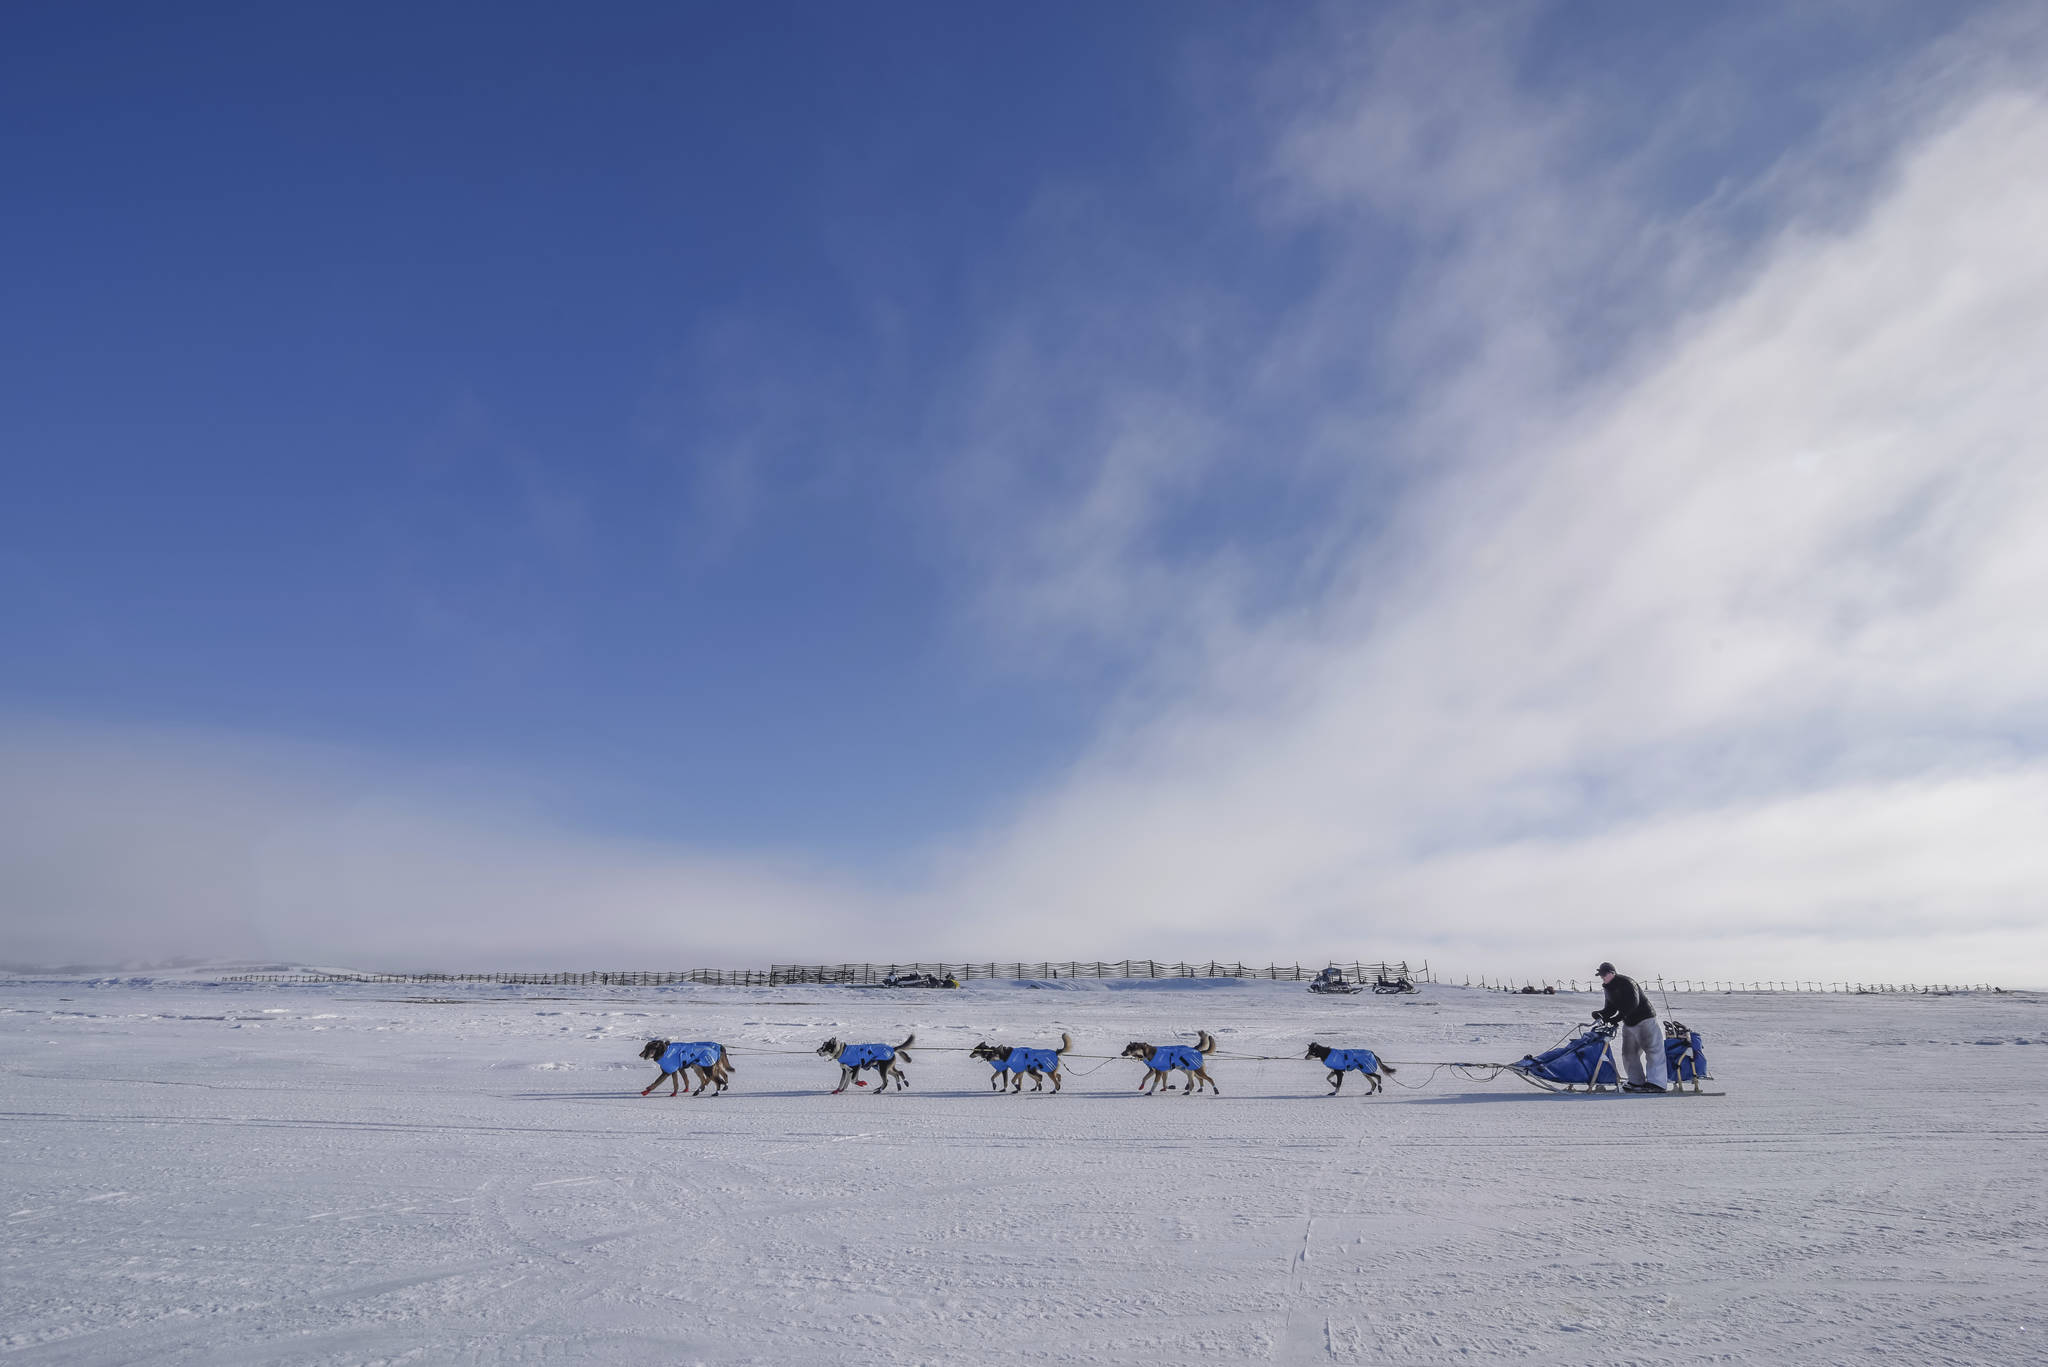 In this Monday photo, veteran musher Scott Smith and his race team travel along the frozen Kouwegok River out of Unalakleet toward the Shaktoolik checkpoint. (Mike Kenney | Iditarod Trail Committee)